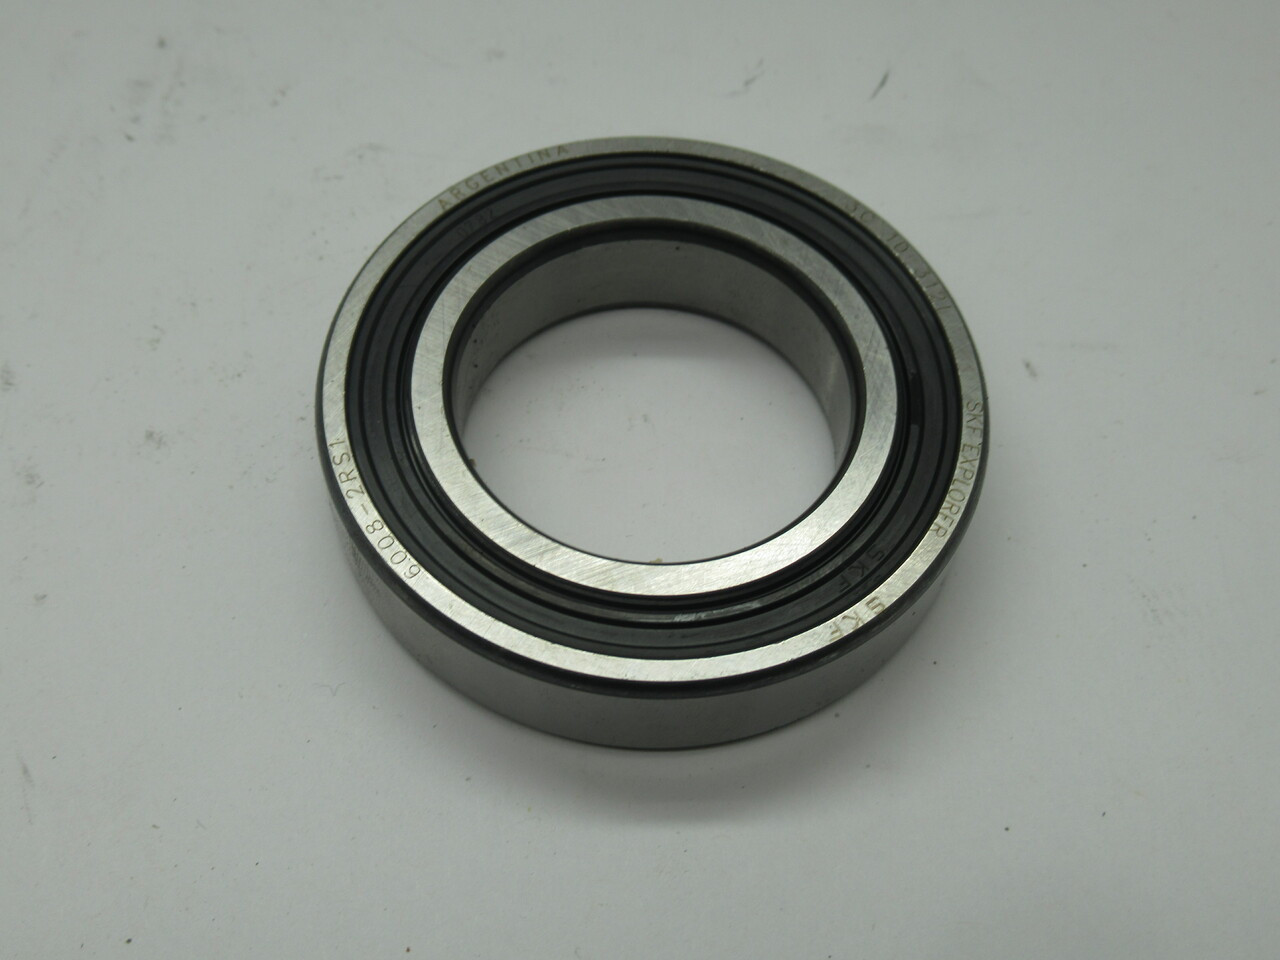 SKF 6008-2RS1 Deep Groove Ball Bearing 40mm Bore 68mm OD 15mm Wide NOP